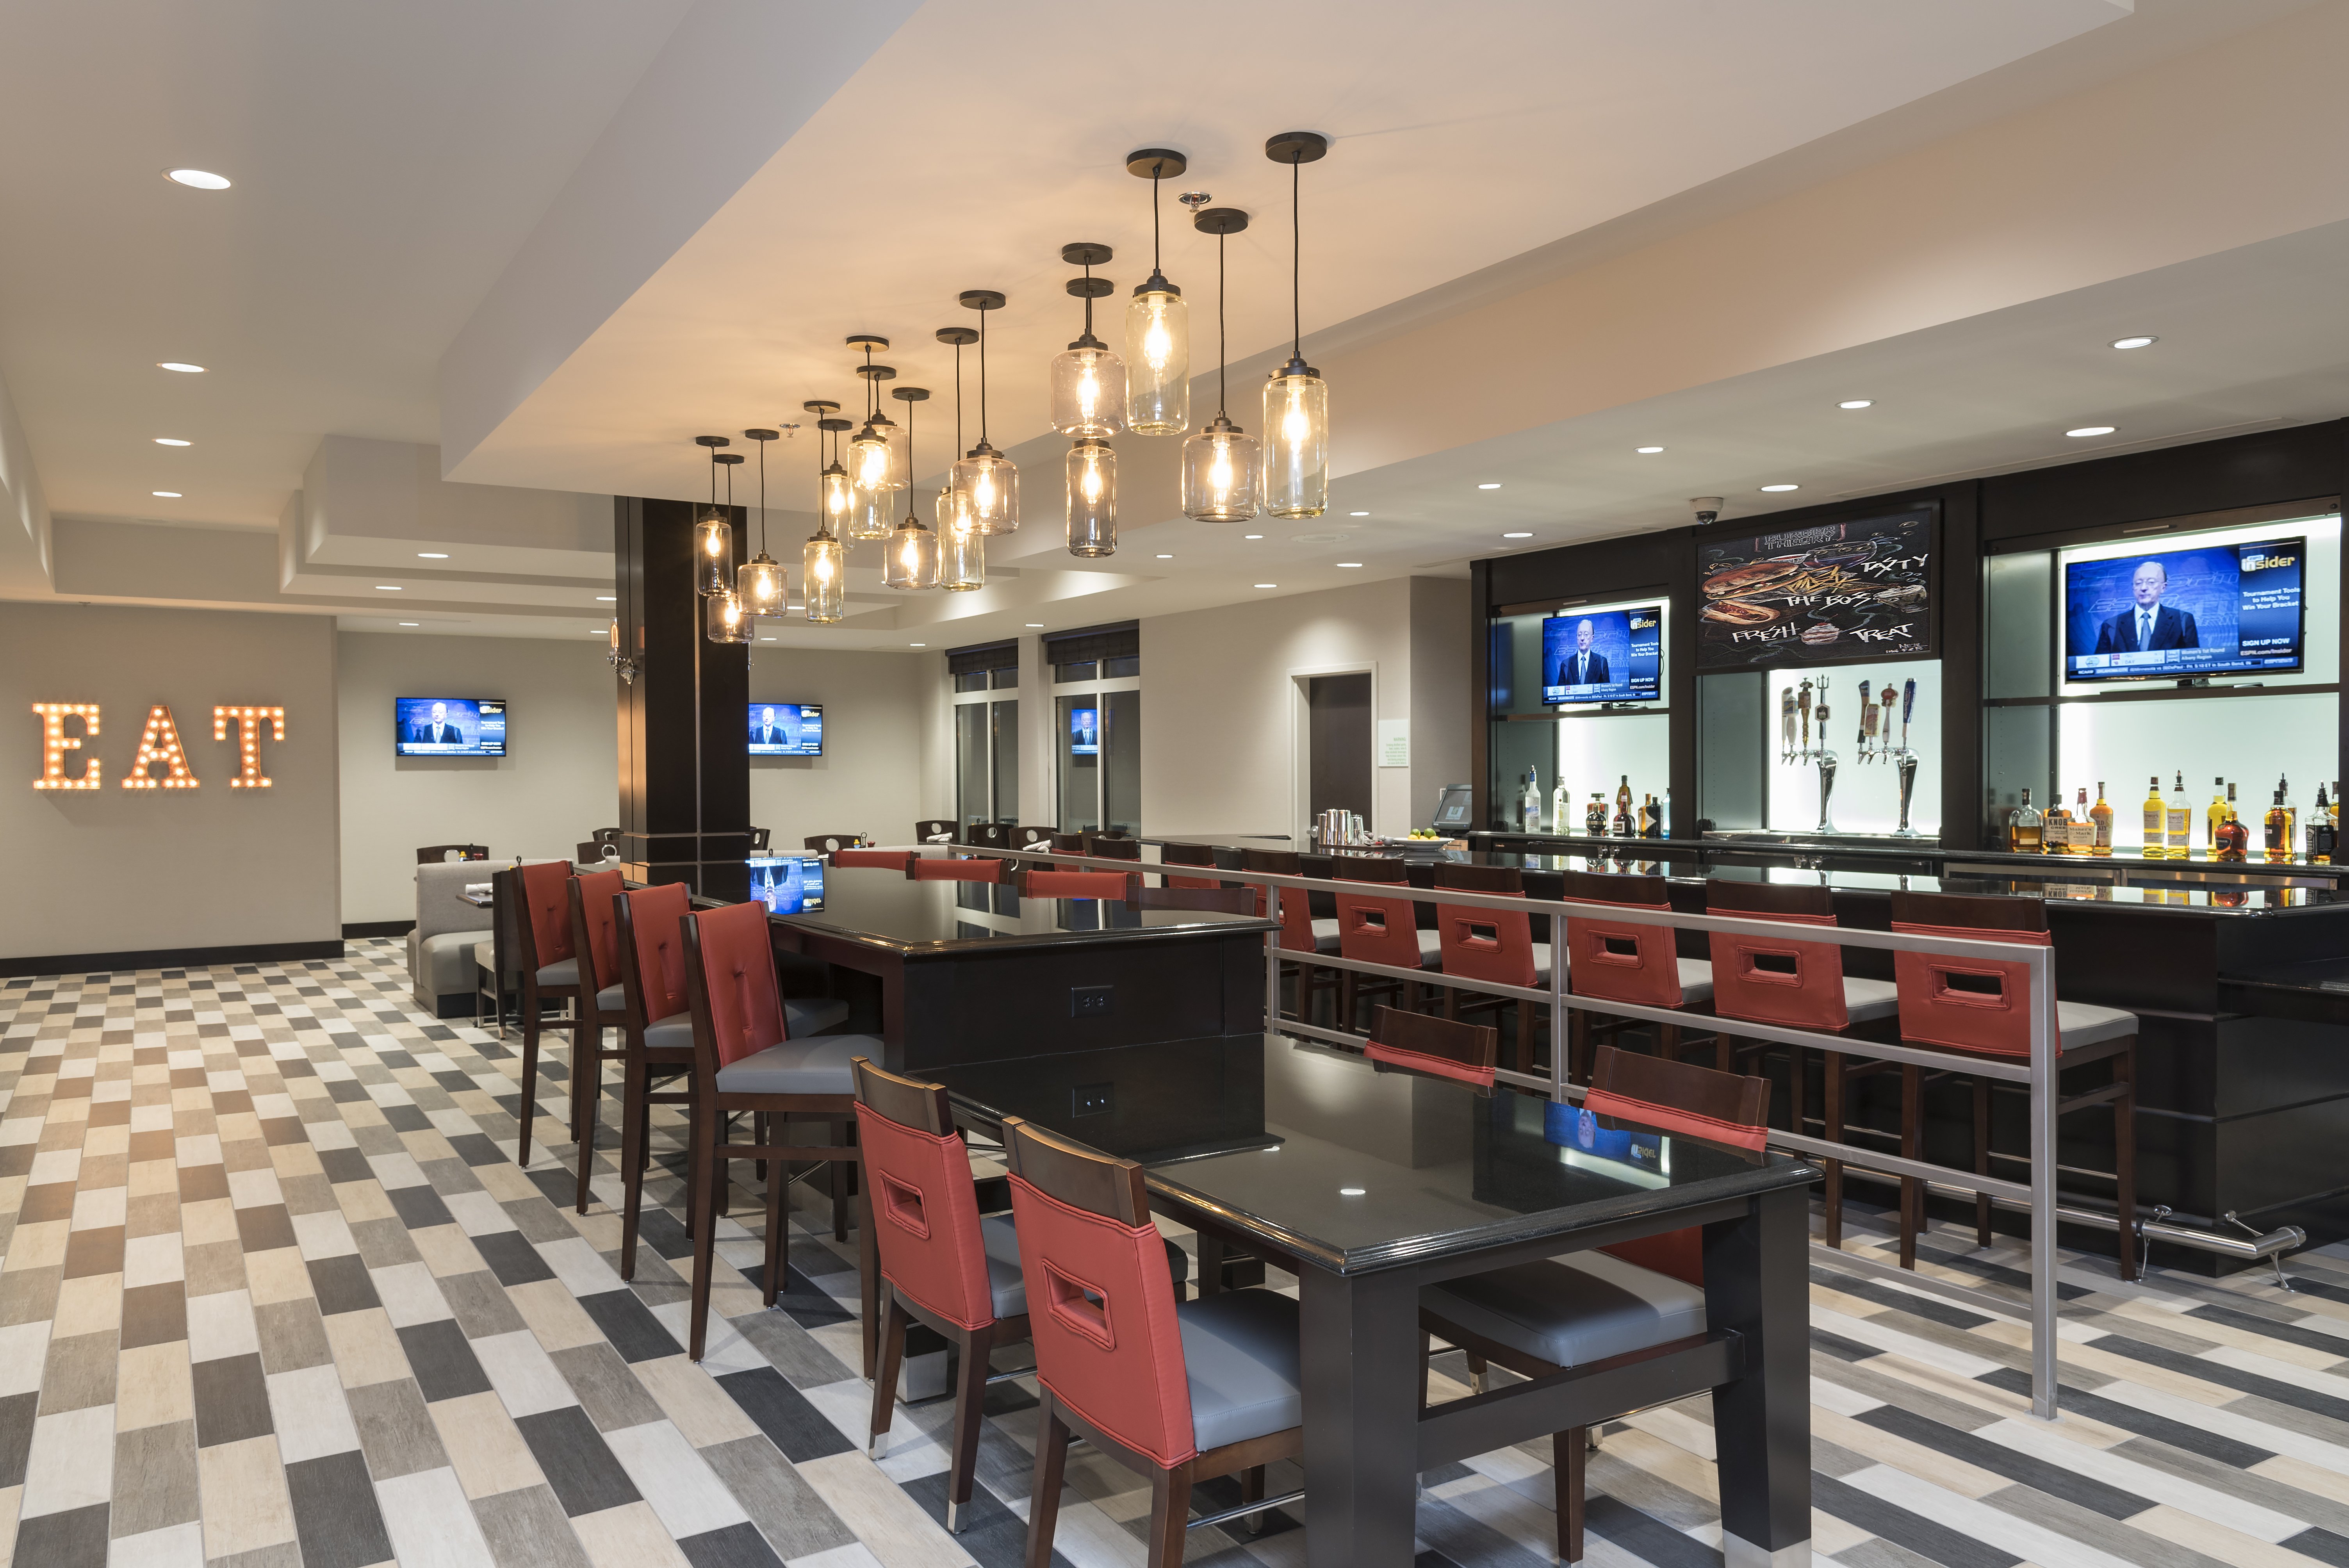 The centralized bar adds a social aspect to the restaurant